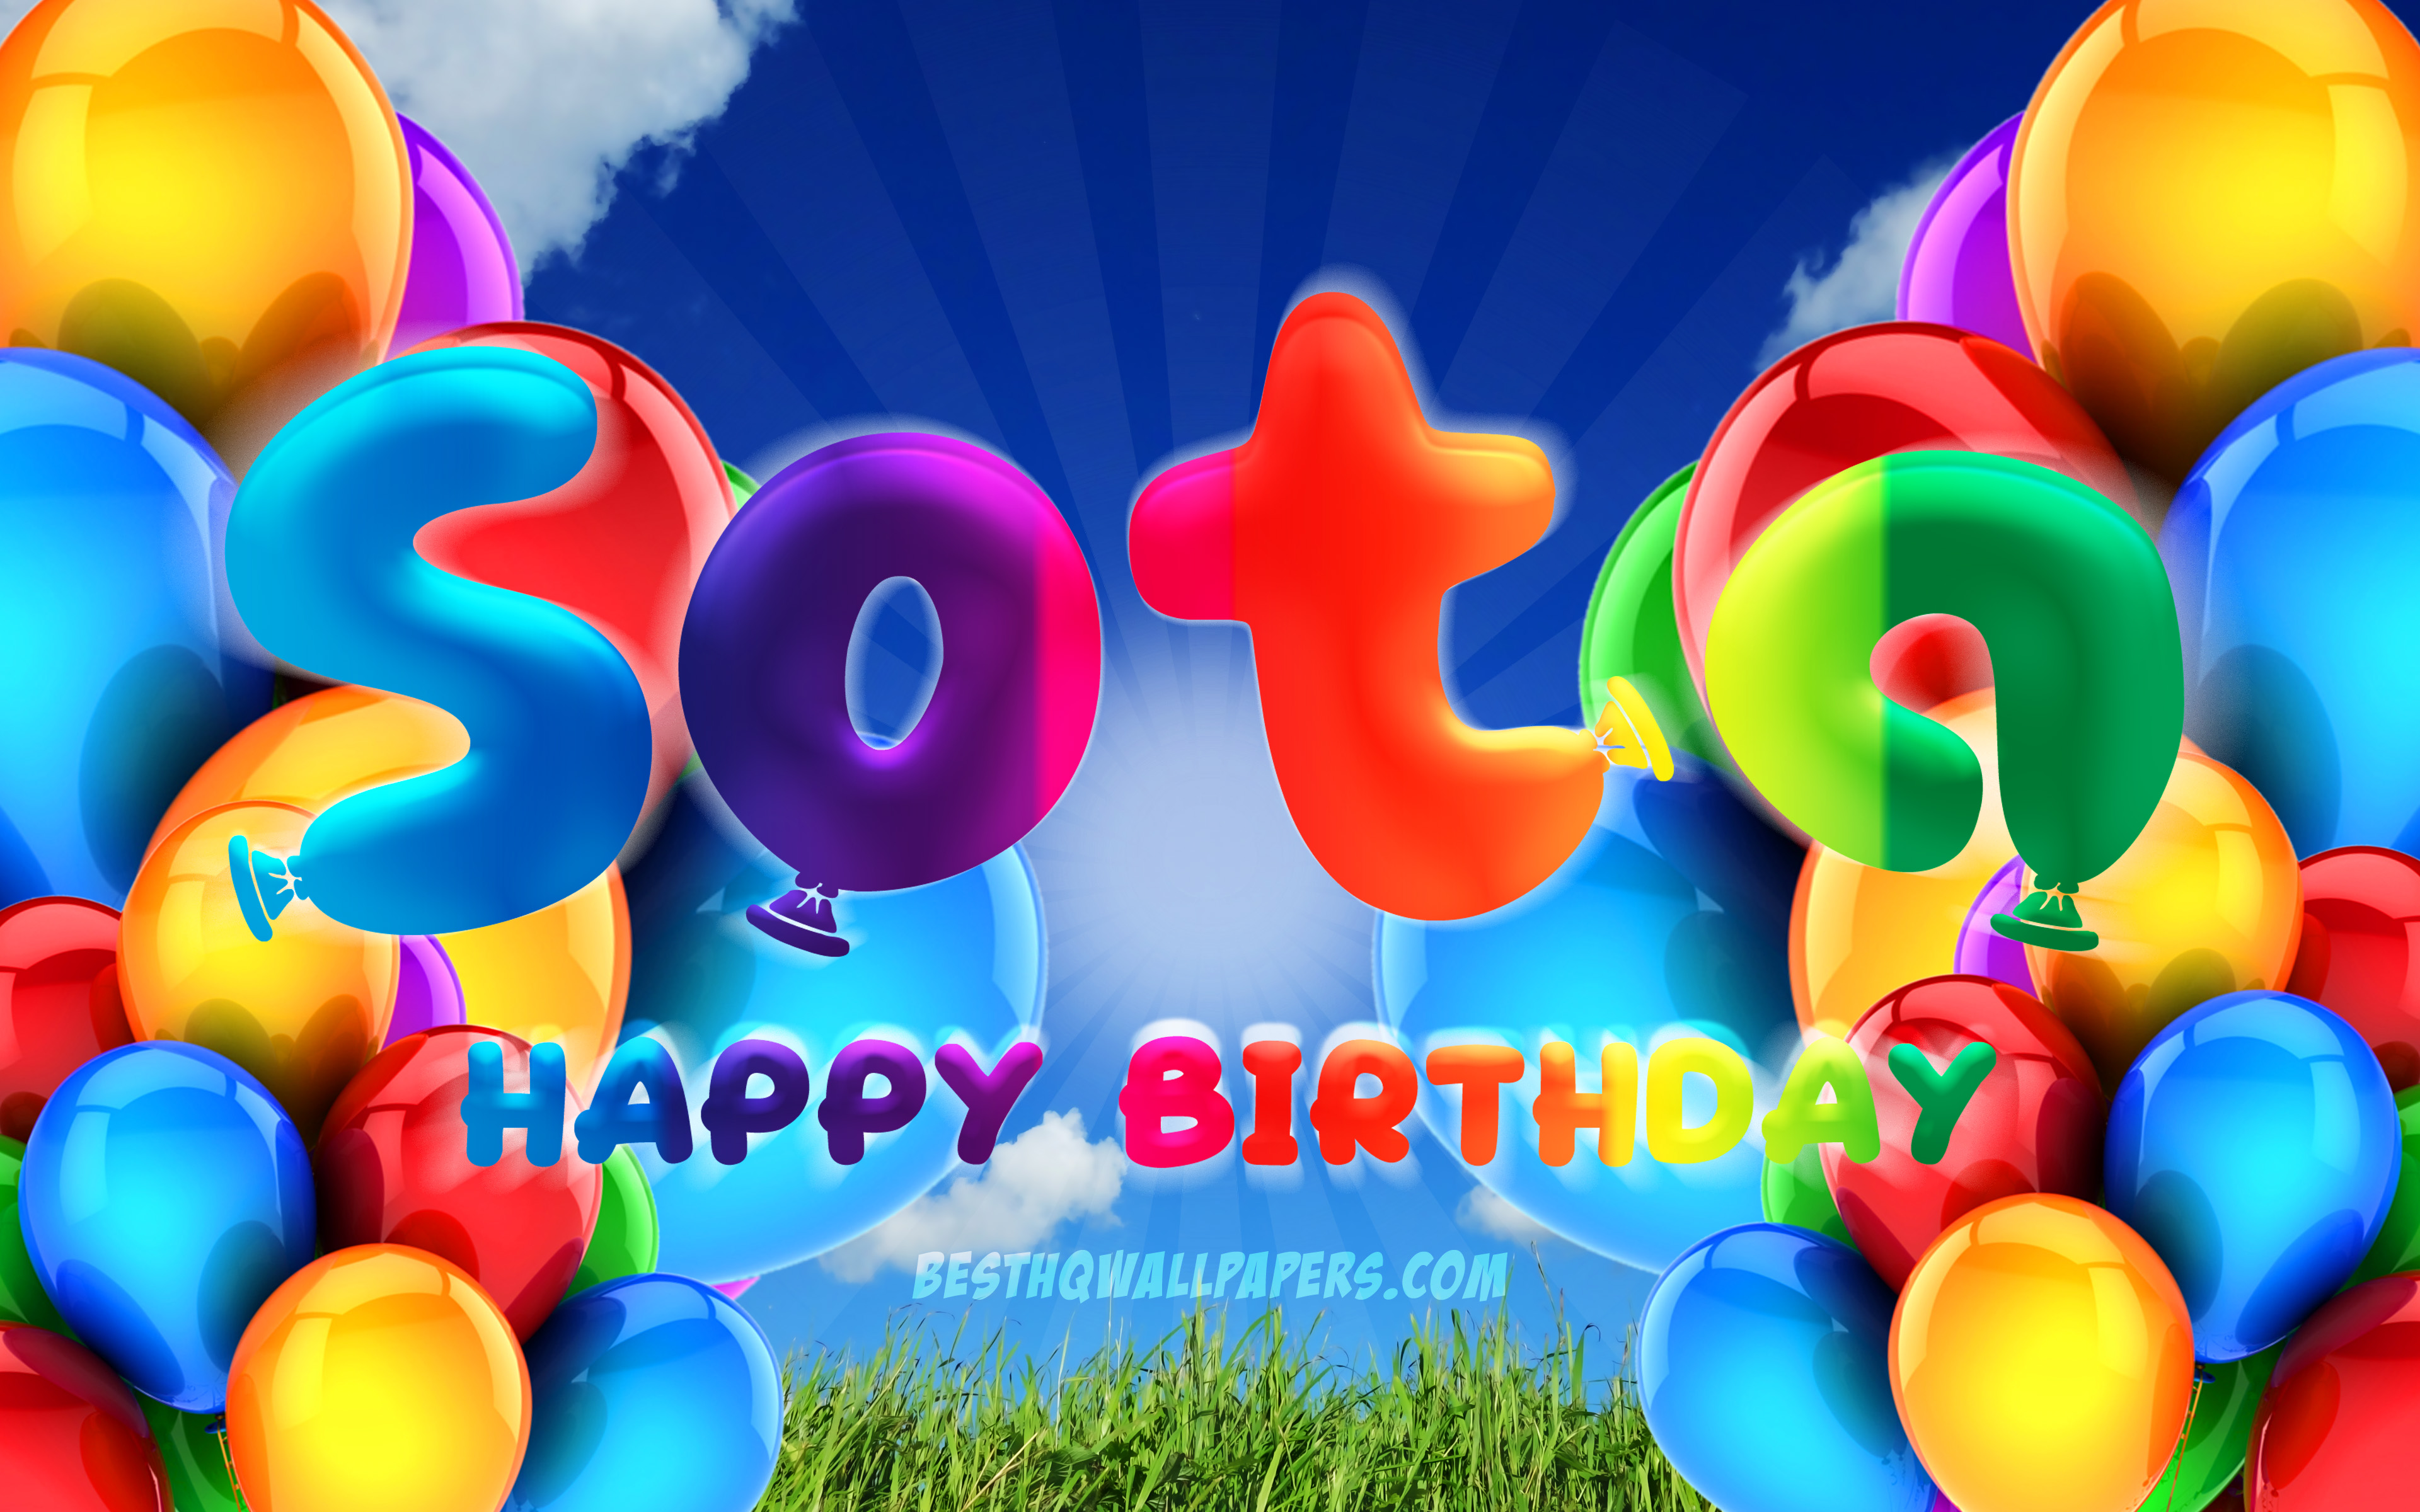 Download Wallpapers Sota Happy Birthday 4k Cloudy Sky Background